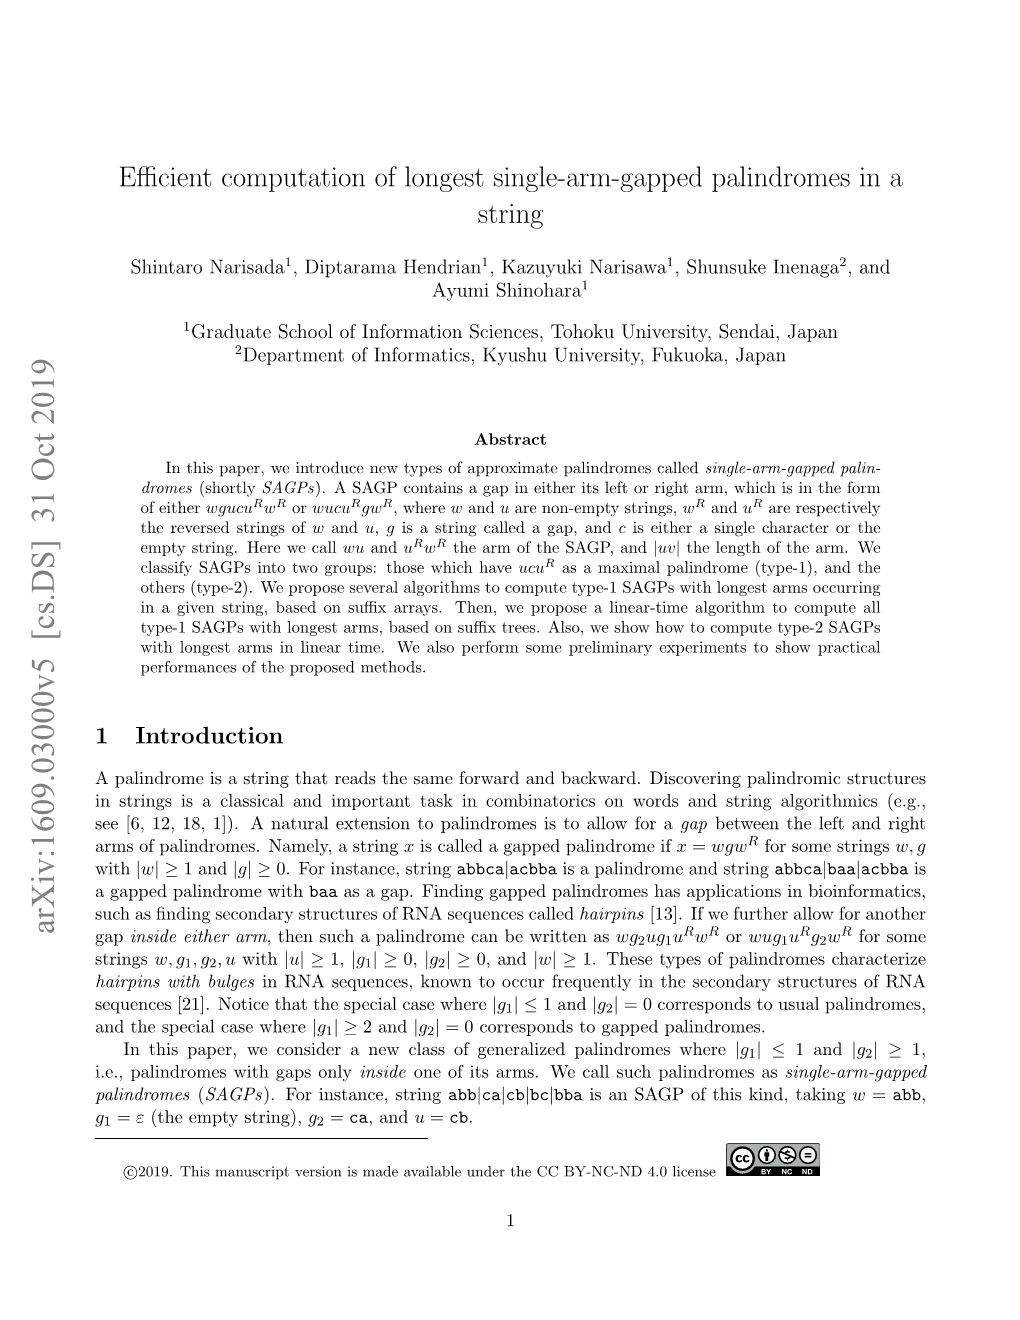 Efficient Computation of Longest Single-Arm-Gapped Palindromes In